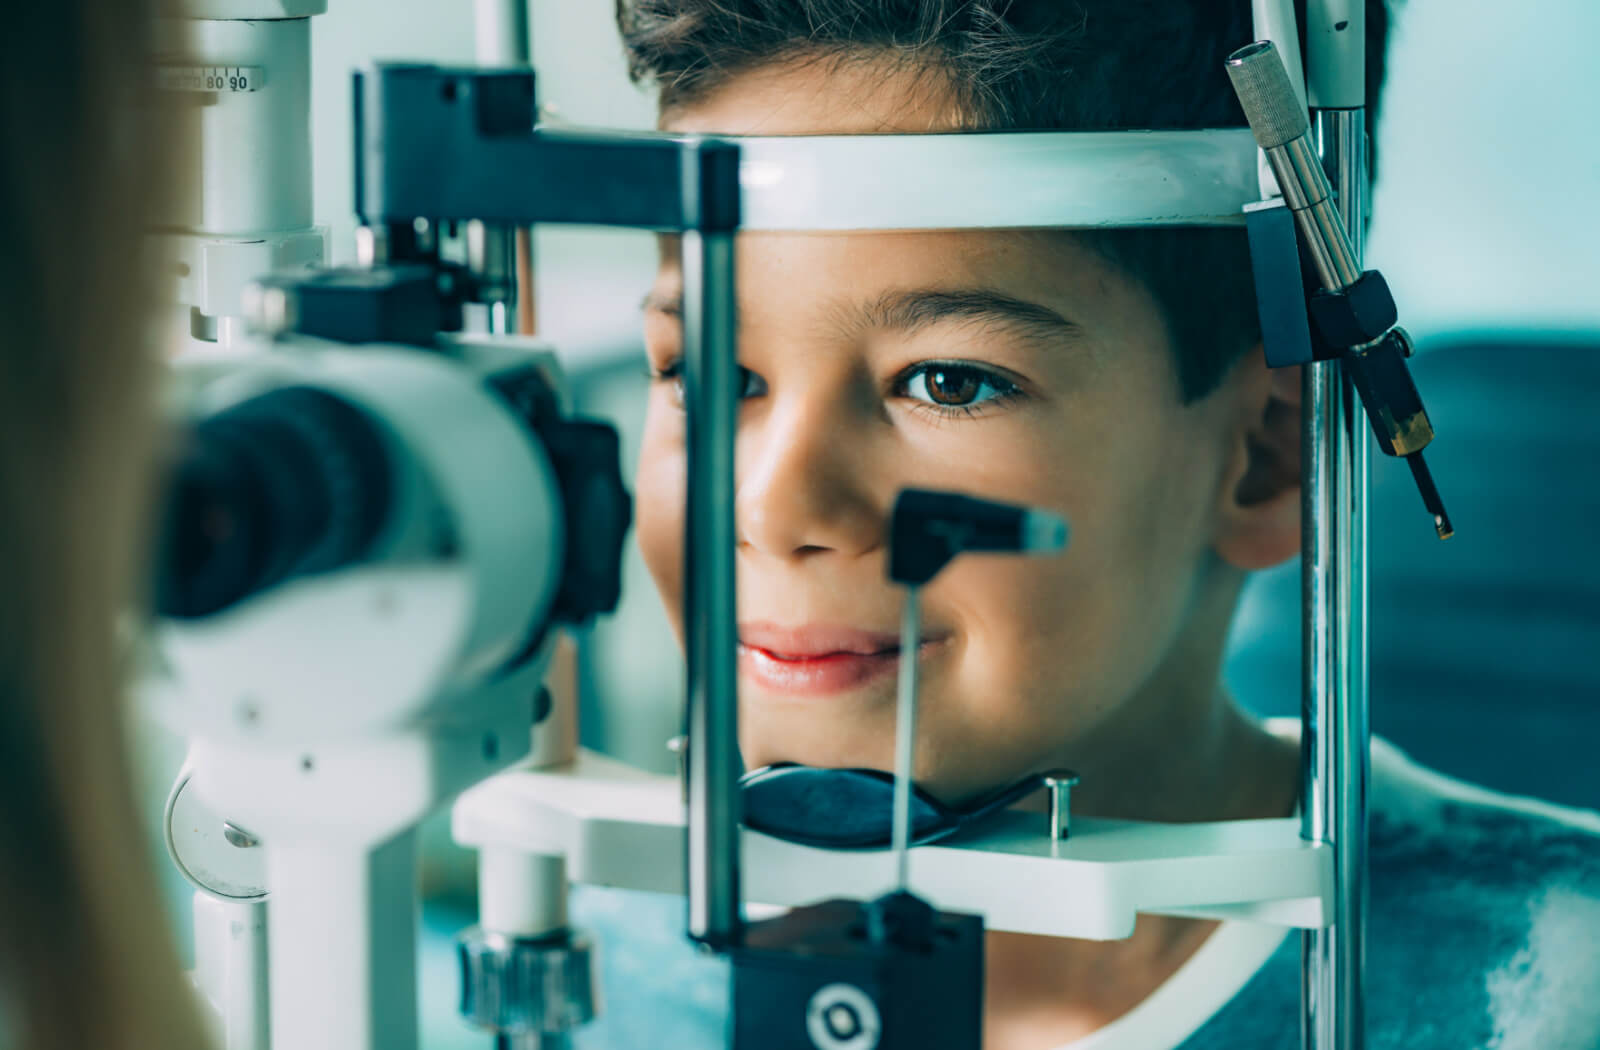 Close-up of a young boy looking into a machine that tests his vision.